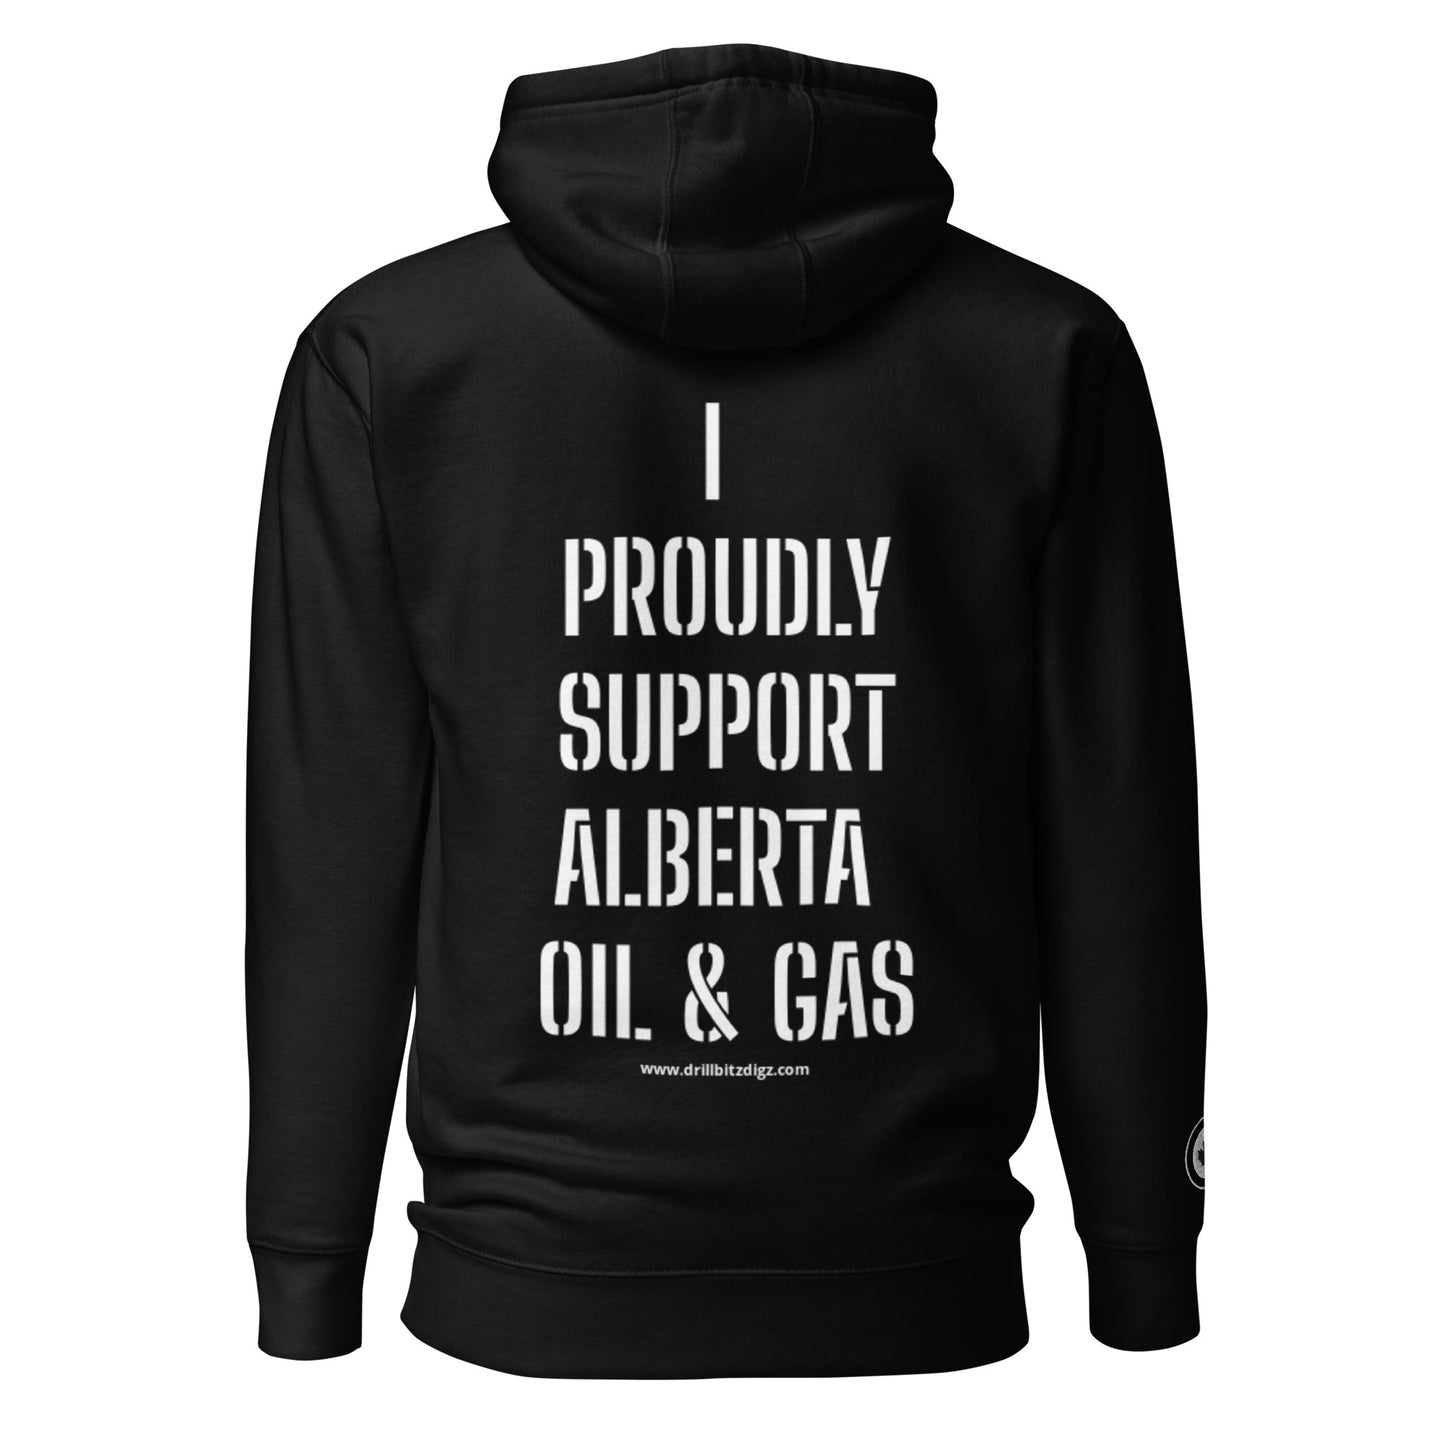 PROUDLY SUPPORT ALBERTA OIL & GAS Hoodie